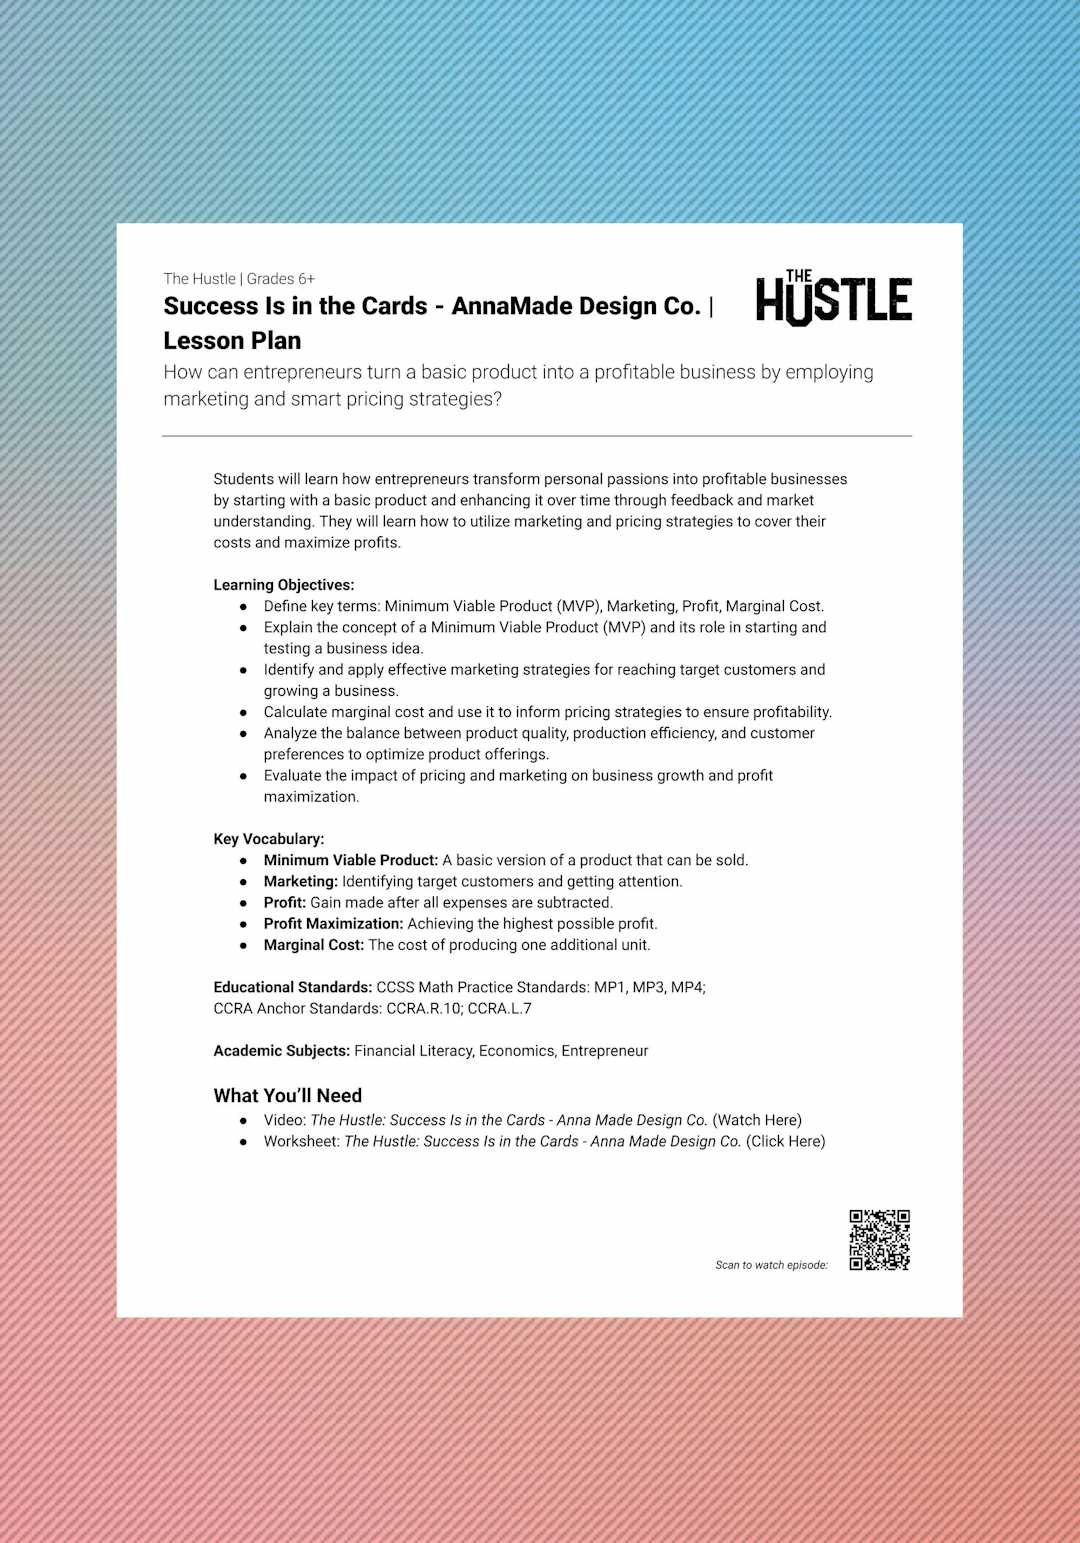 "The Hustle: Success Is in the Cards - AnnaMade Design Co." Lesson Plan